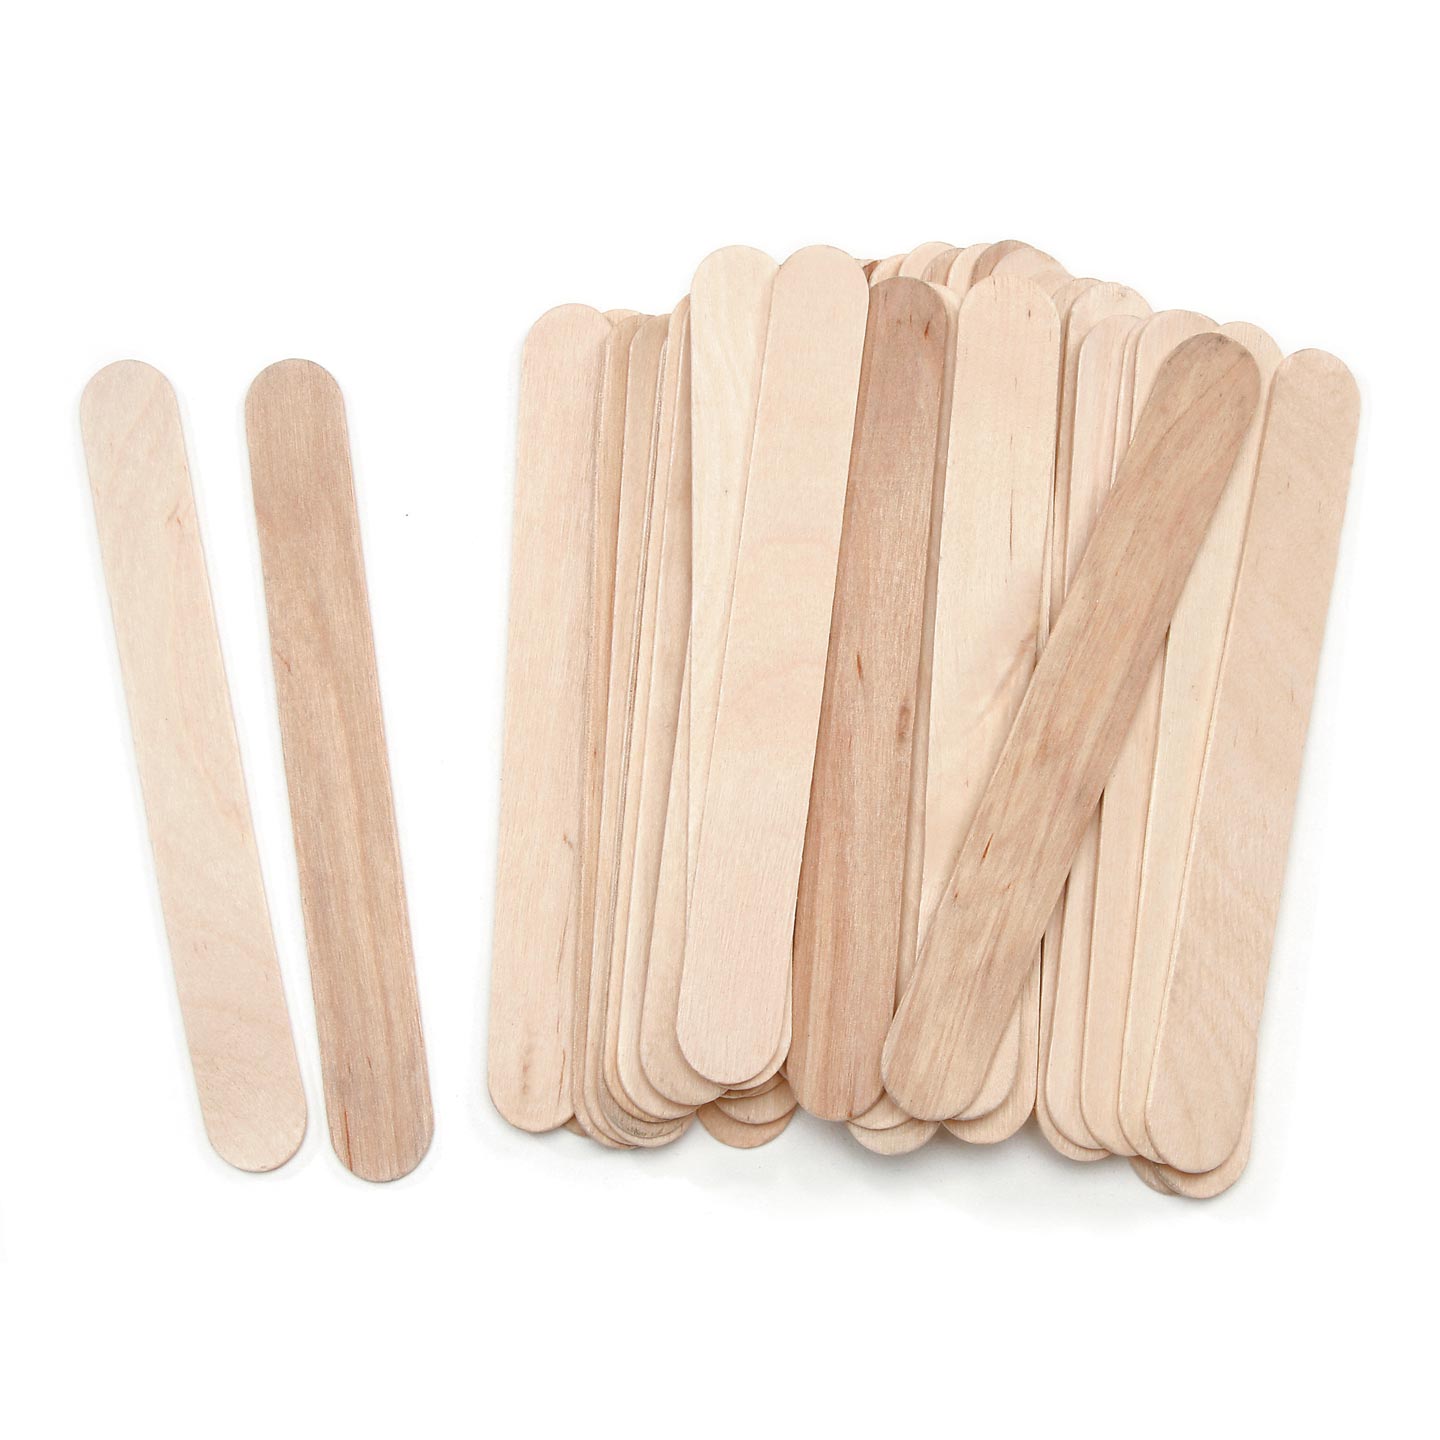 Wood Crafts - Wooden Craft Sticks, Wooden Spools, Hinged Wooden Boxes